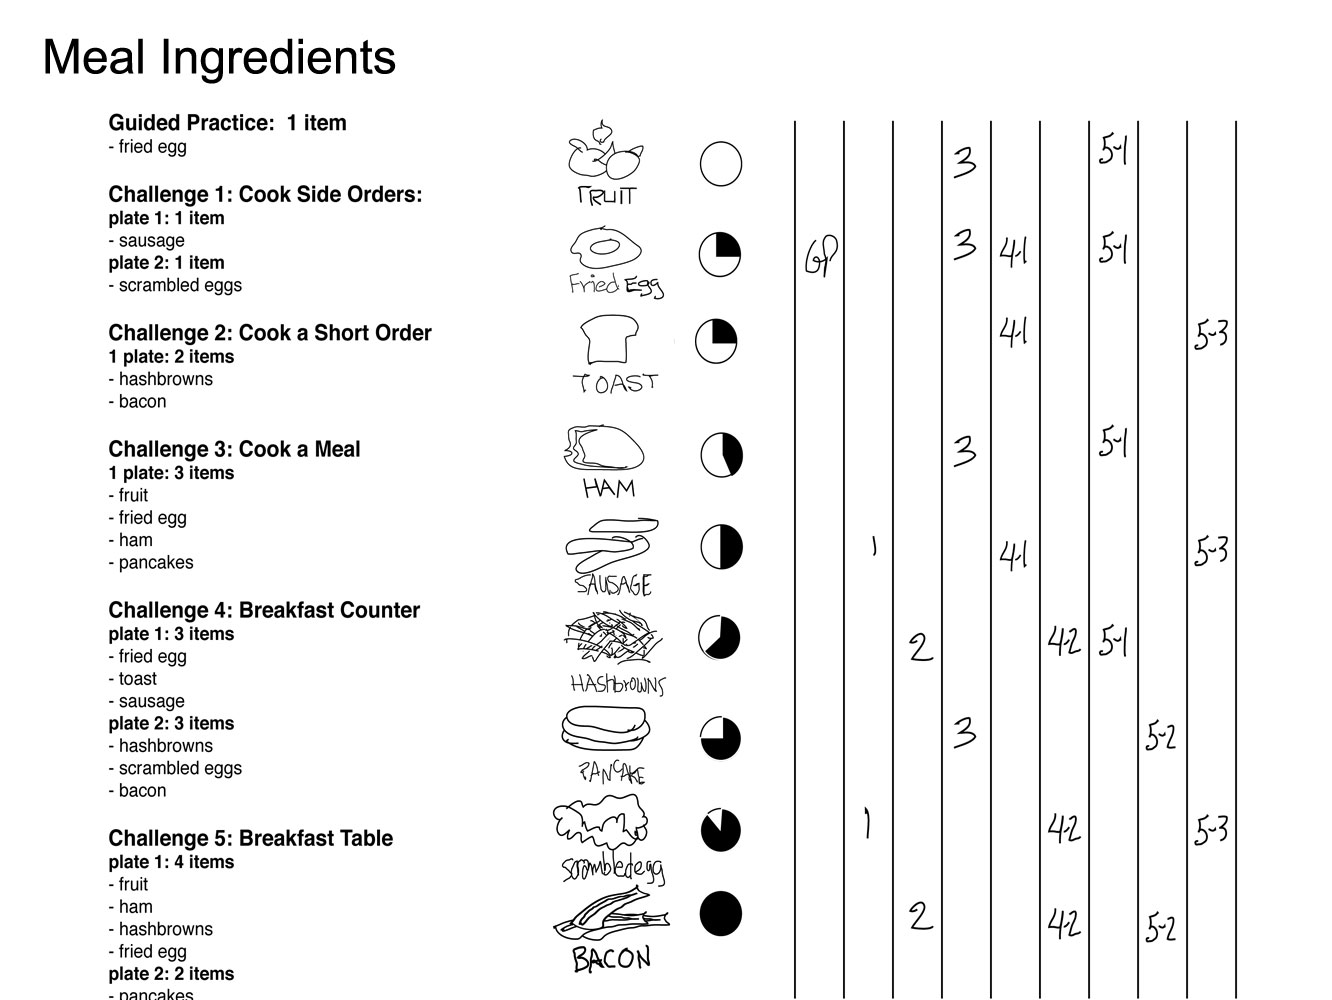  I documented each key feature of the game. This table shows the ingredients for each meal. 